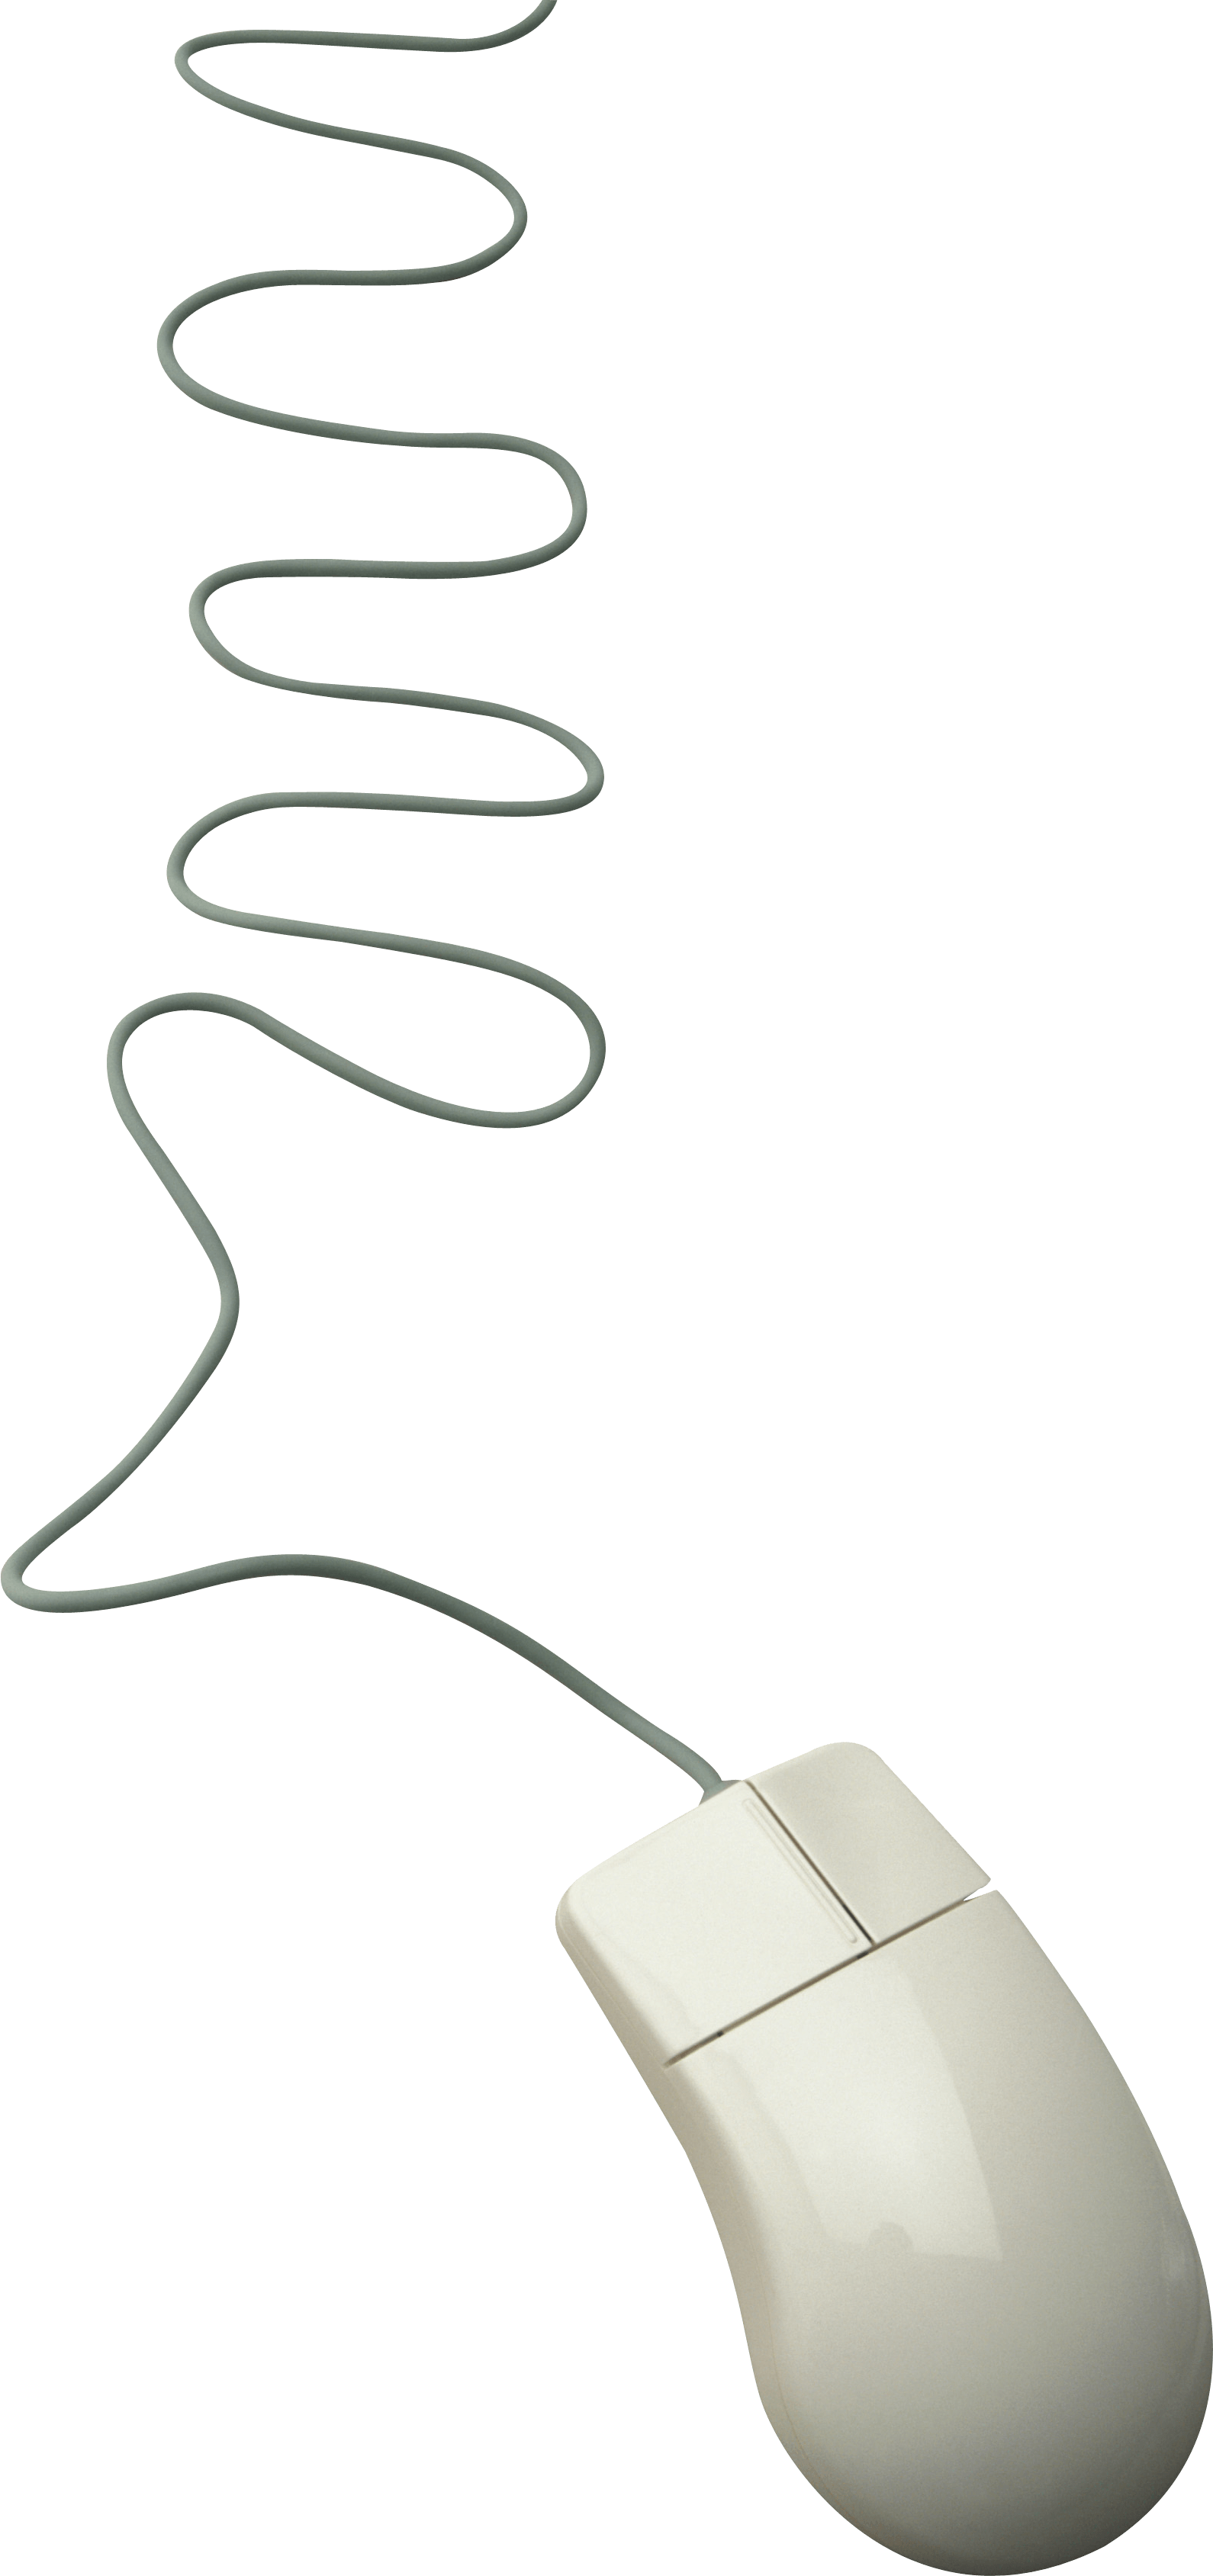 White Computer Mouse Png Image PNG Image